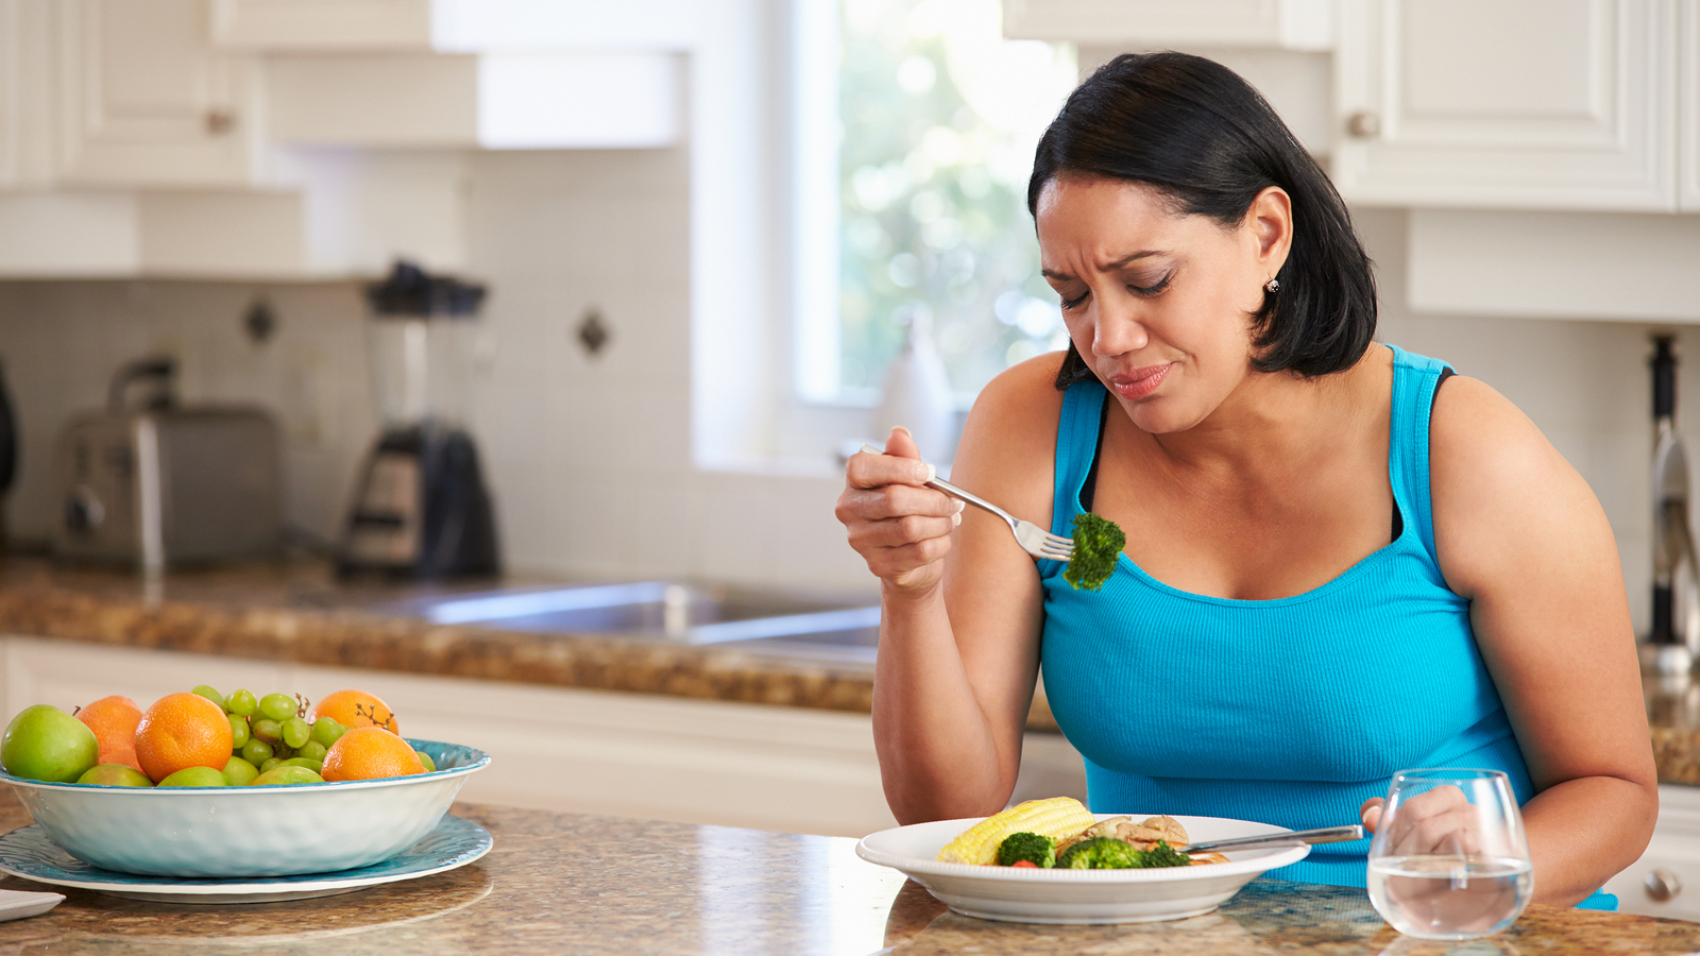 Fed Up Overweight Woman Eating Healthy Meal in Kitchen